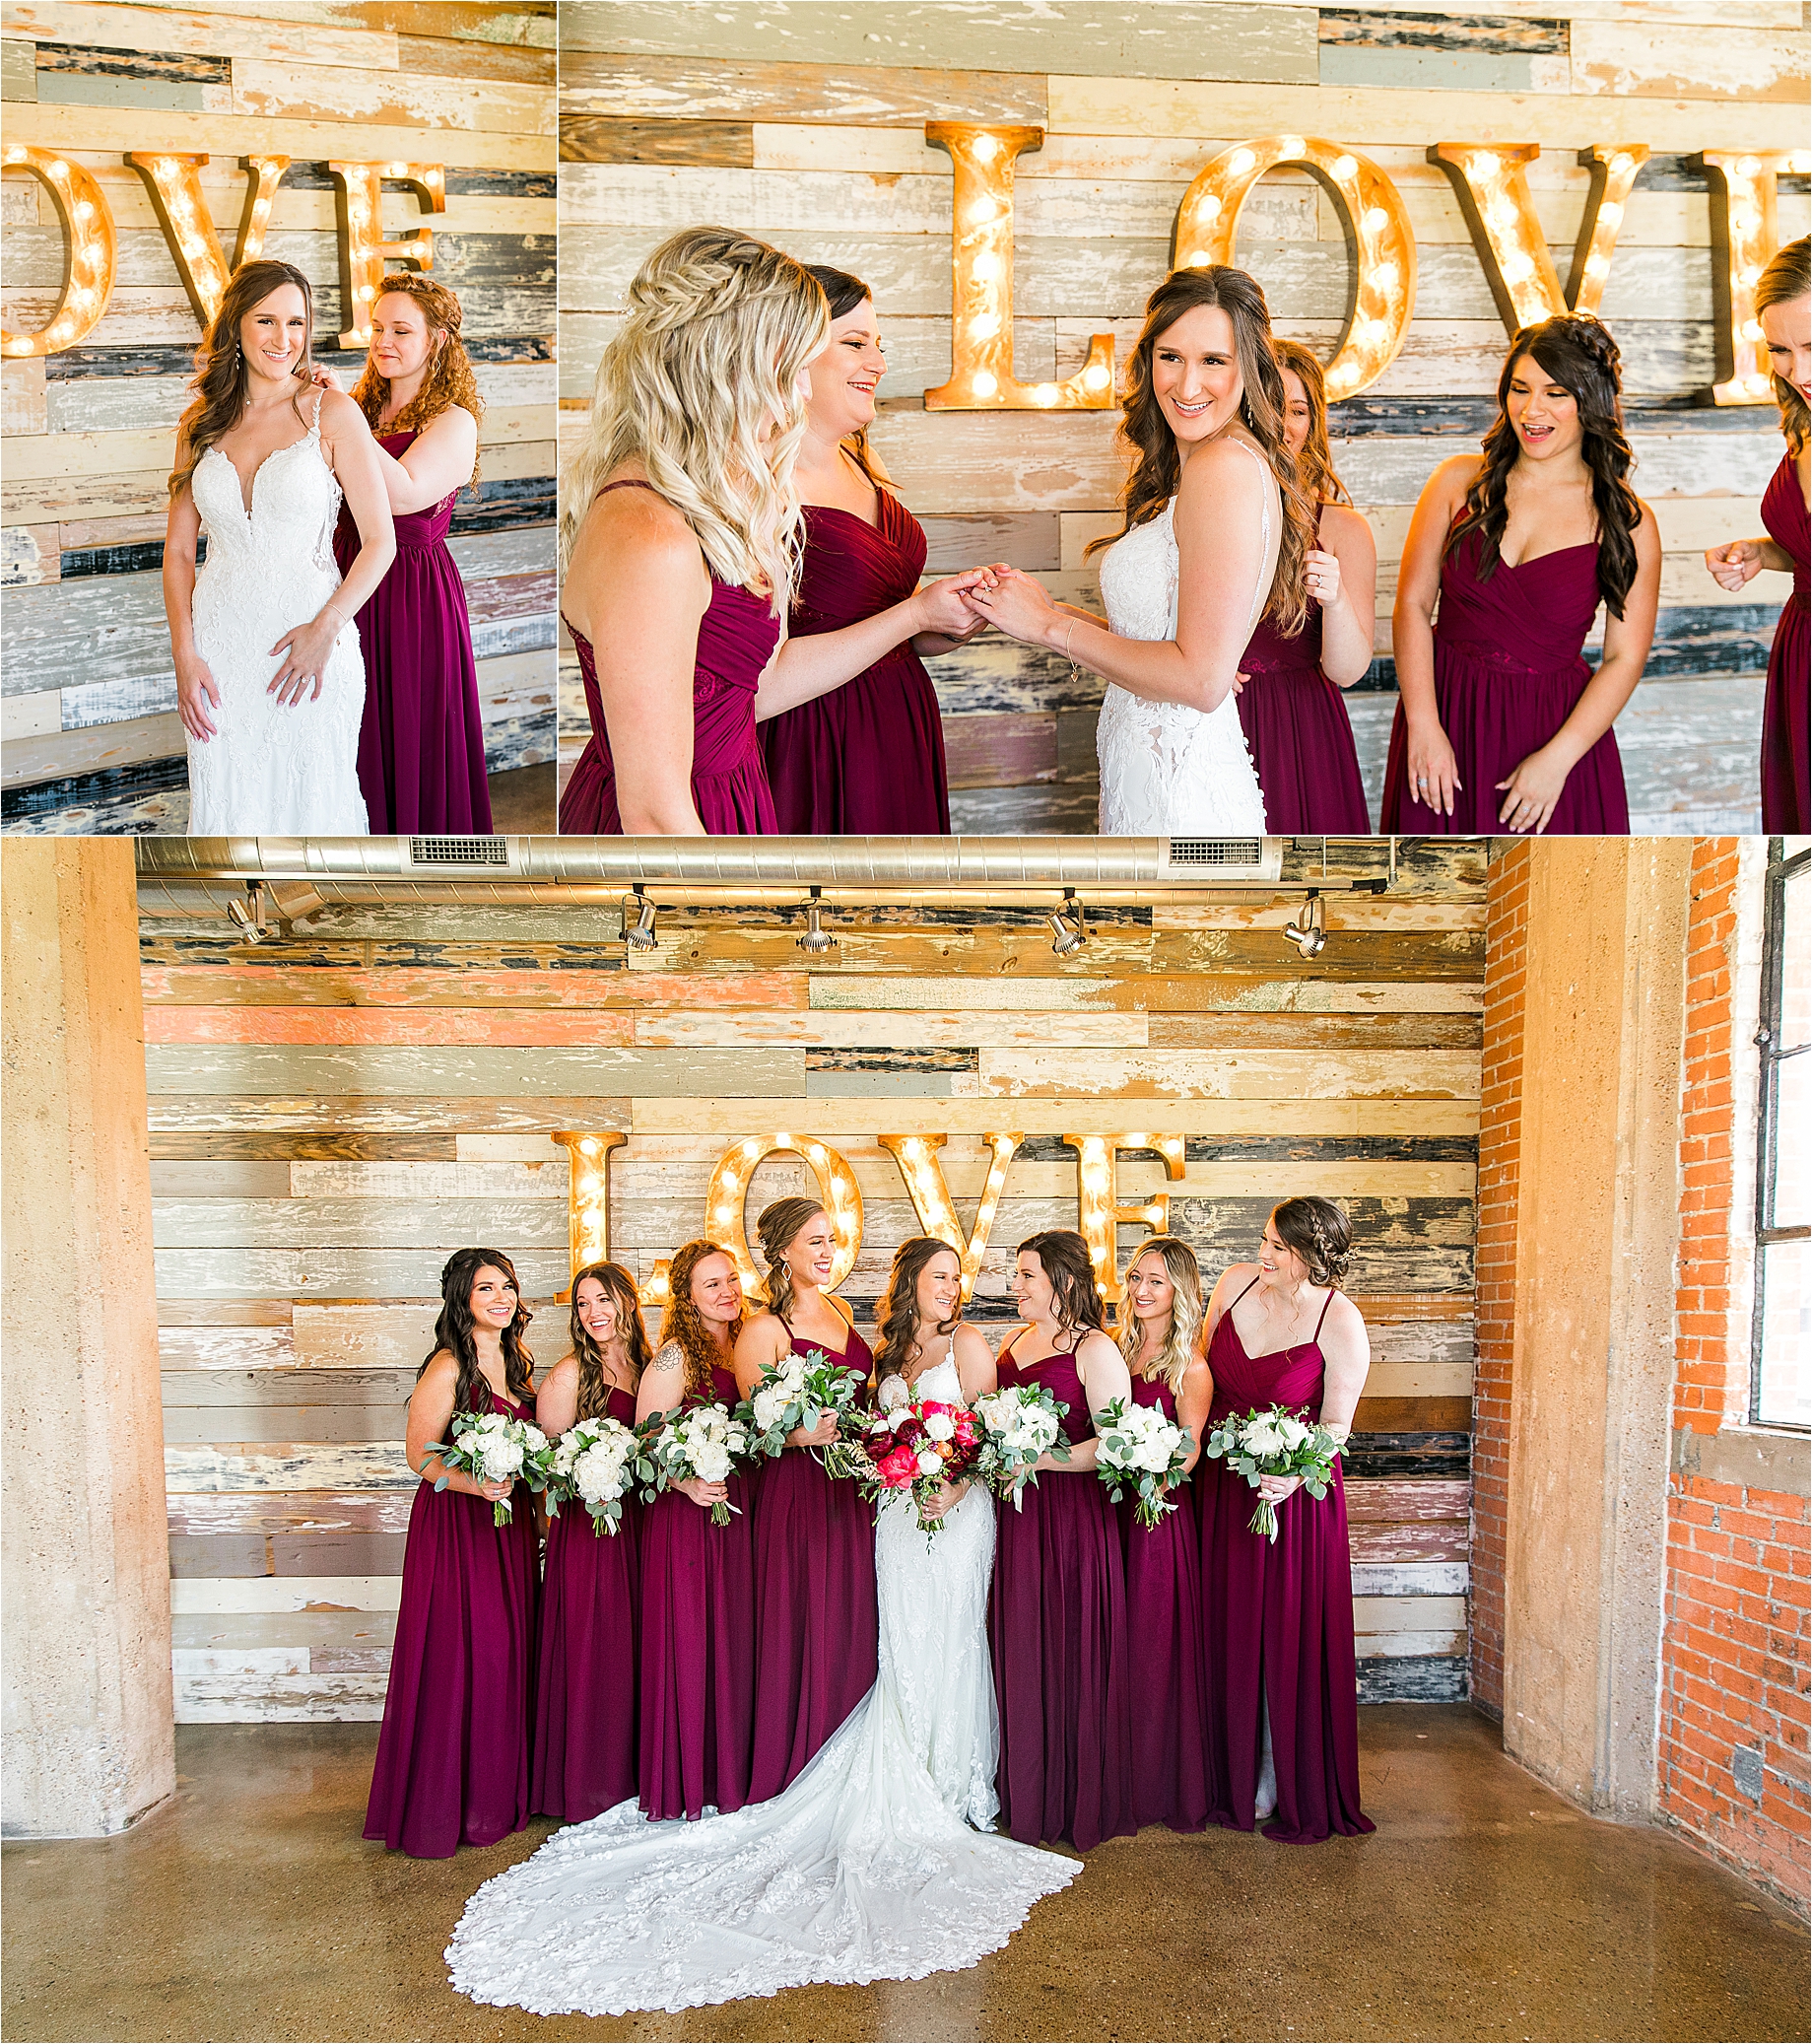 A bridesmaids puts on a bride's necklace and they pose for photos in a rustic bridal suite at HIckory Street Annex in Dallas, Texas